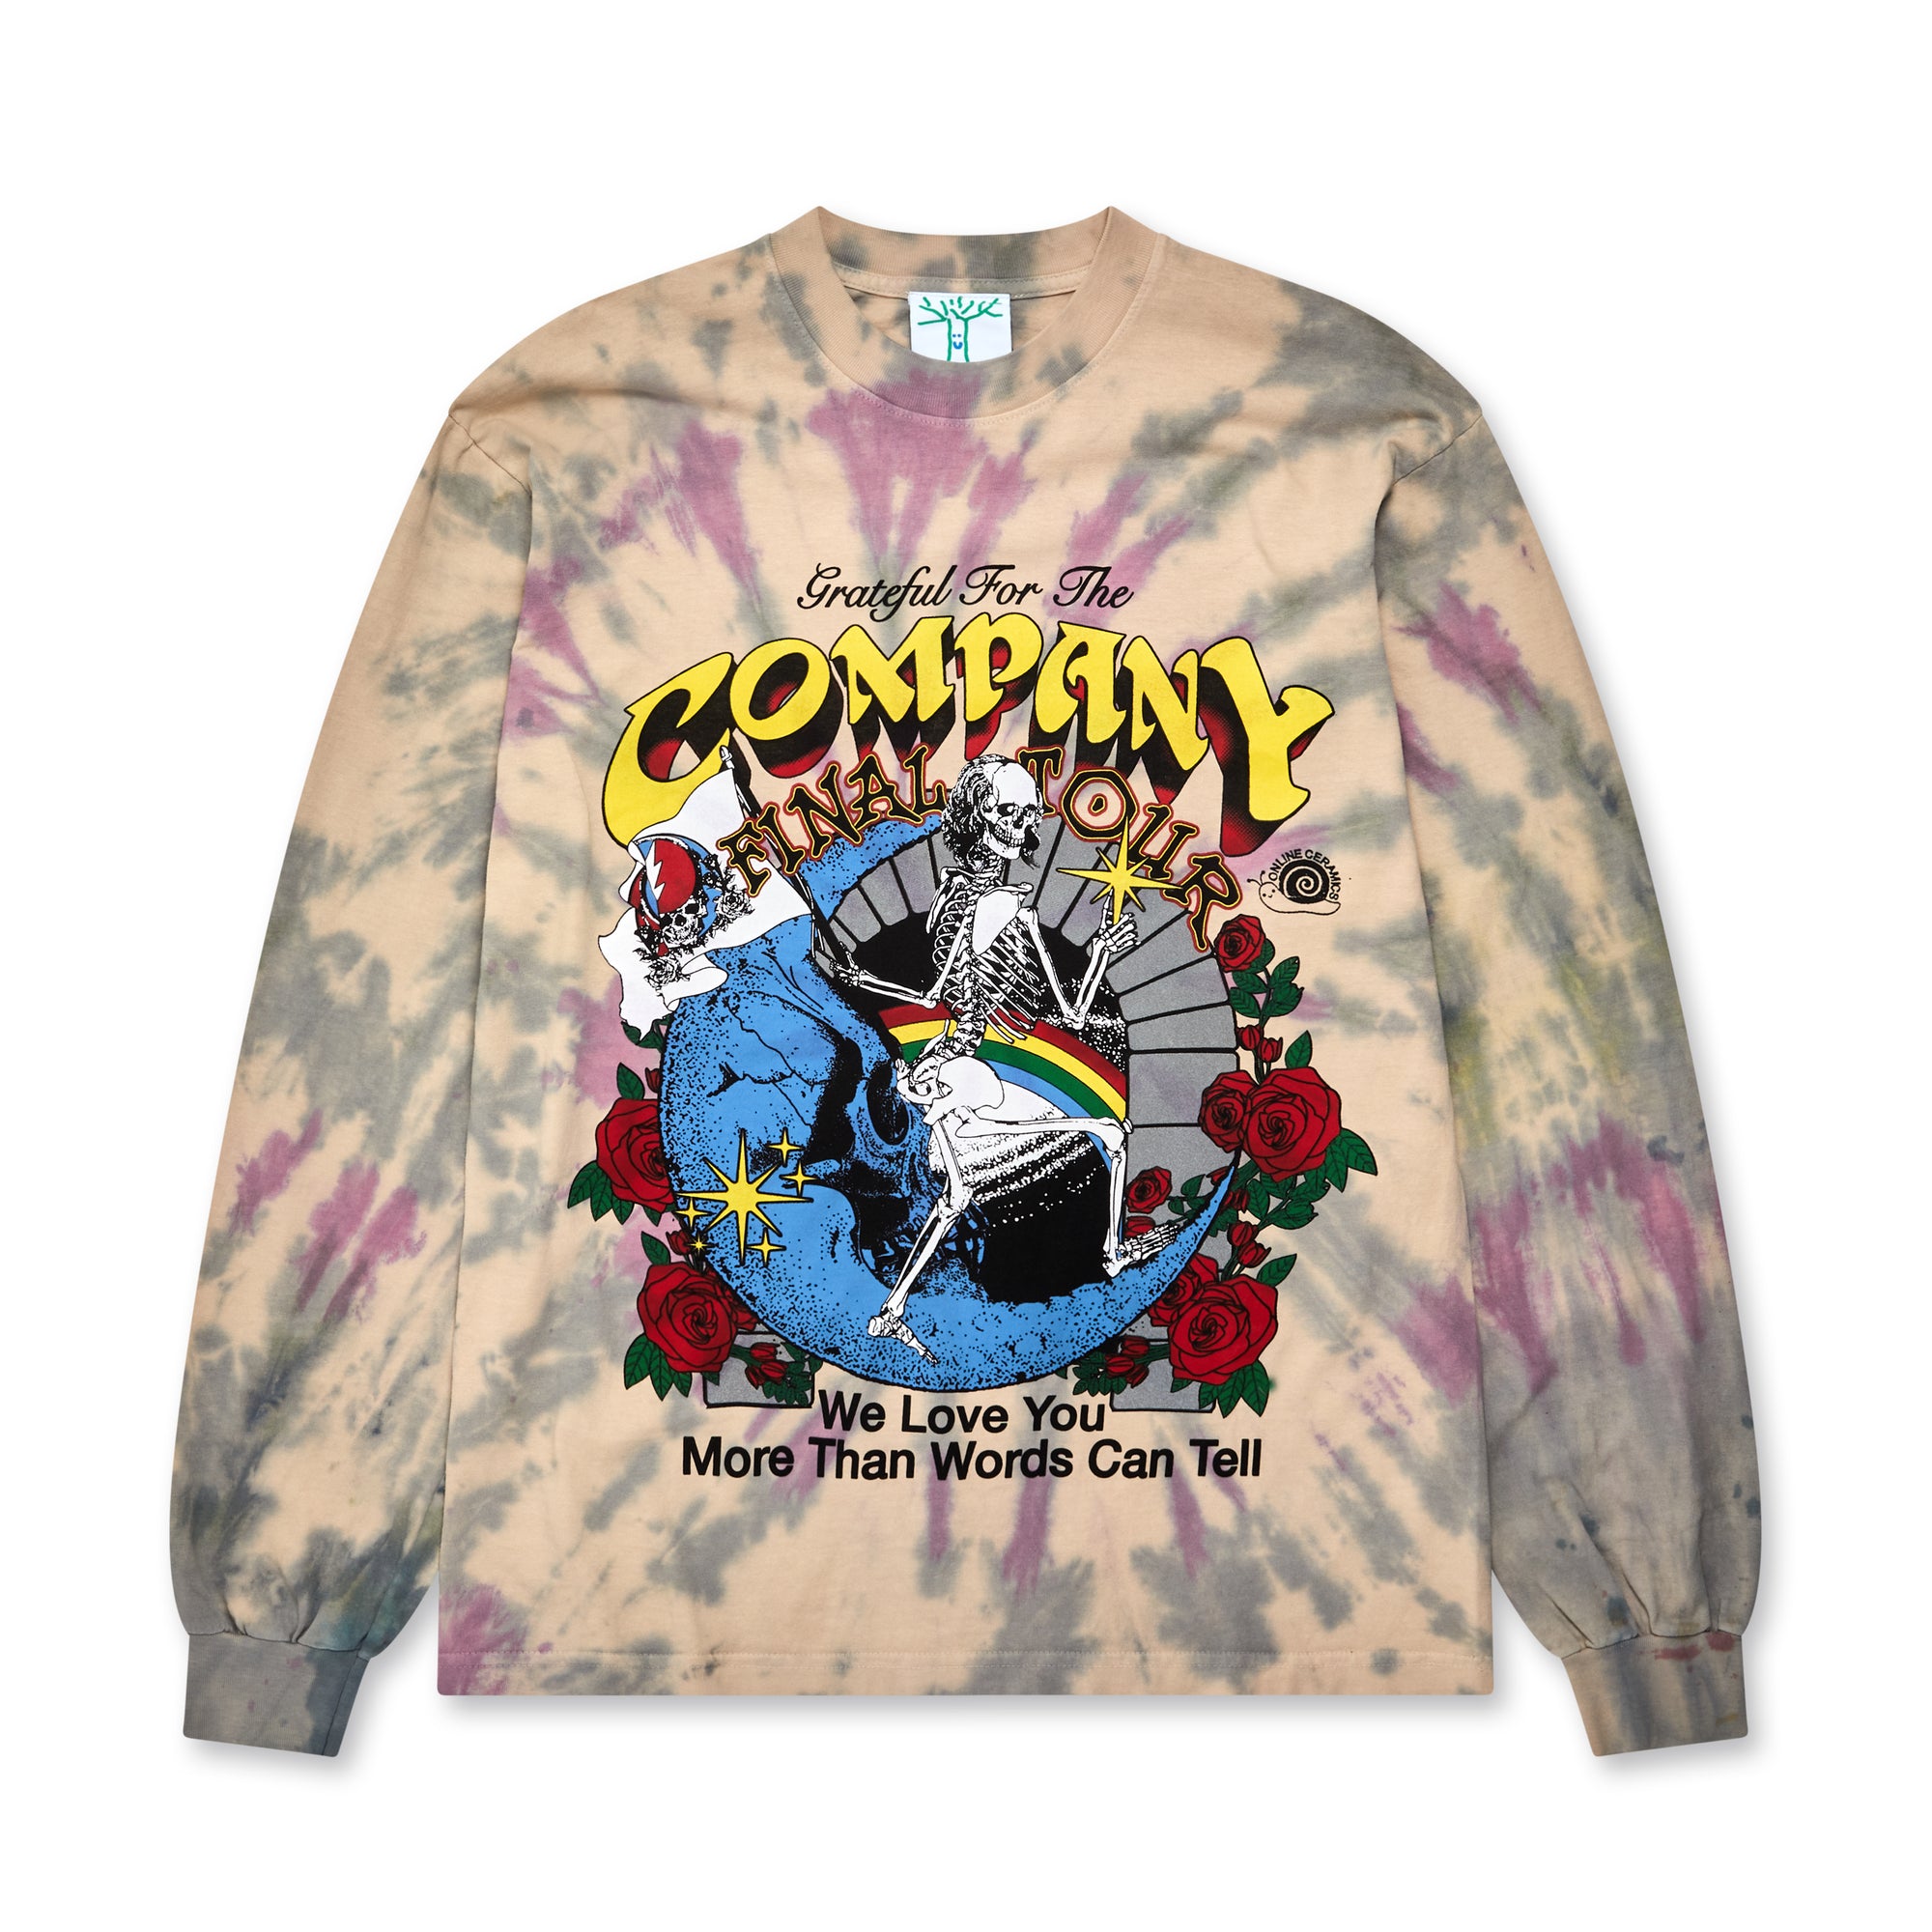 Online Ceramics - Grateful For The Company LS Tee - (Tie-Dye) view 1